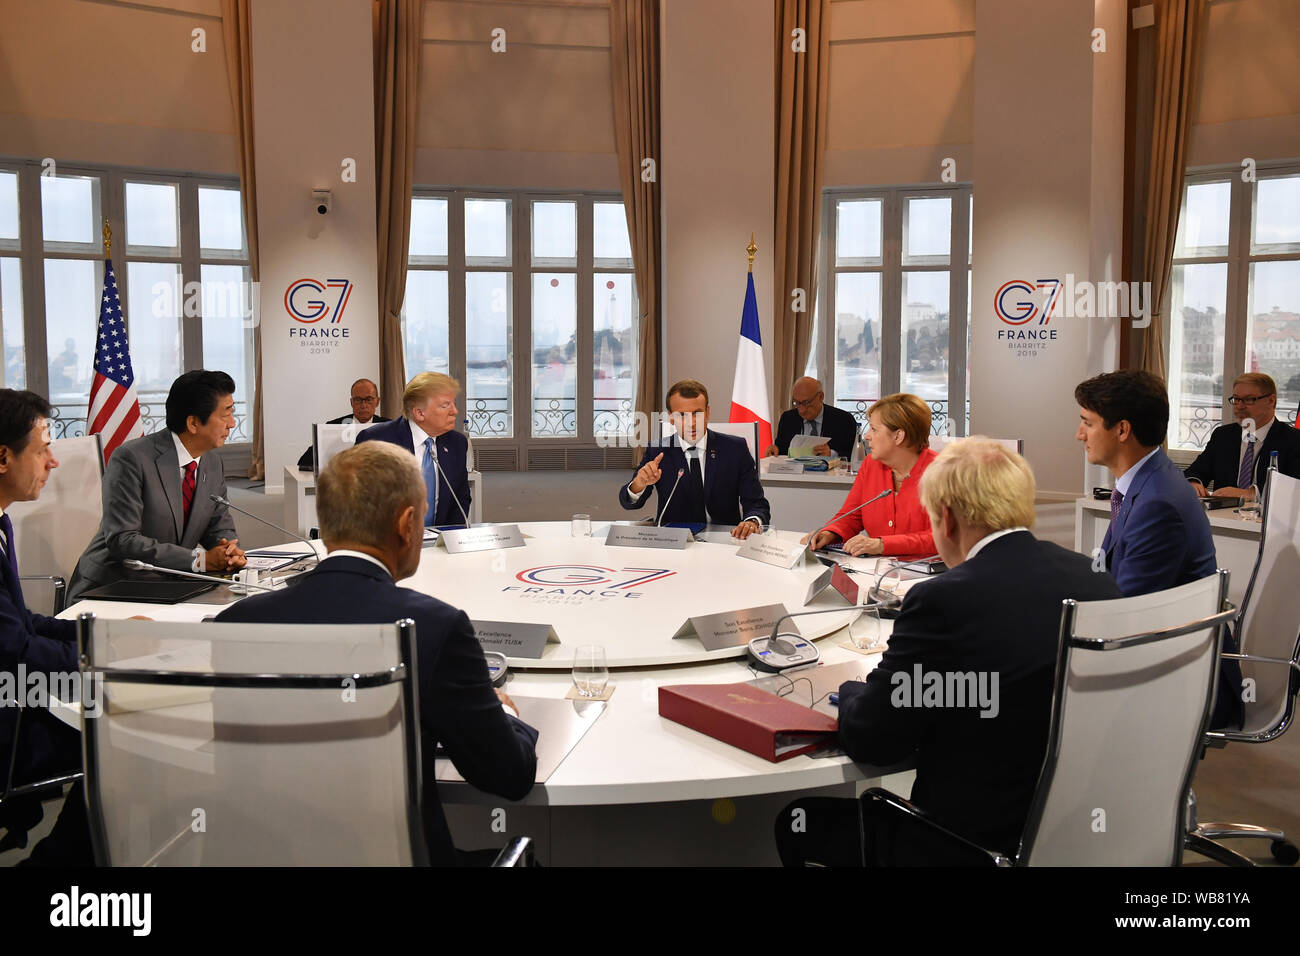 Canada's Prime Minister Justin Trudeau, Prime Minister Boris Johnson, Germany's Chancellor Angela Merkel, European Council President Donald Tusk, France's President Emmanuel Macron, Italy's Prime Minister Giuseppe Conte, Japan's Prime Minister Shinzo Abe and US President Donald Trump meet for the first working session of the G7 Summit in Biarritz, France. Stock Photo